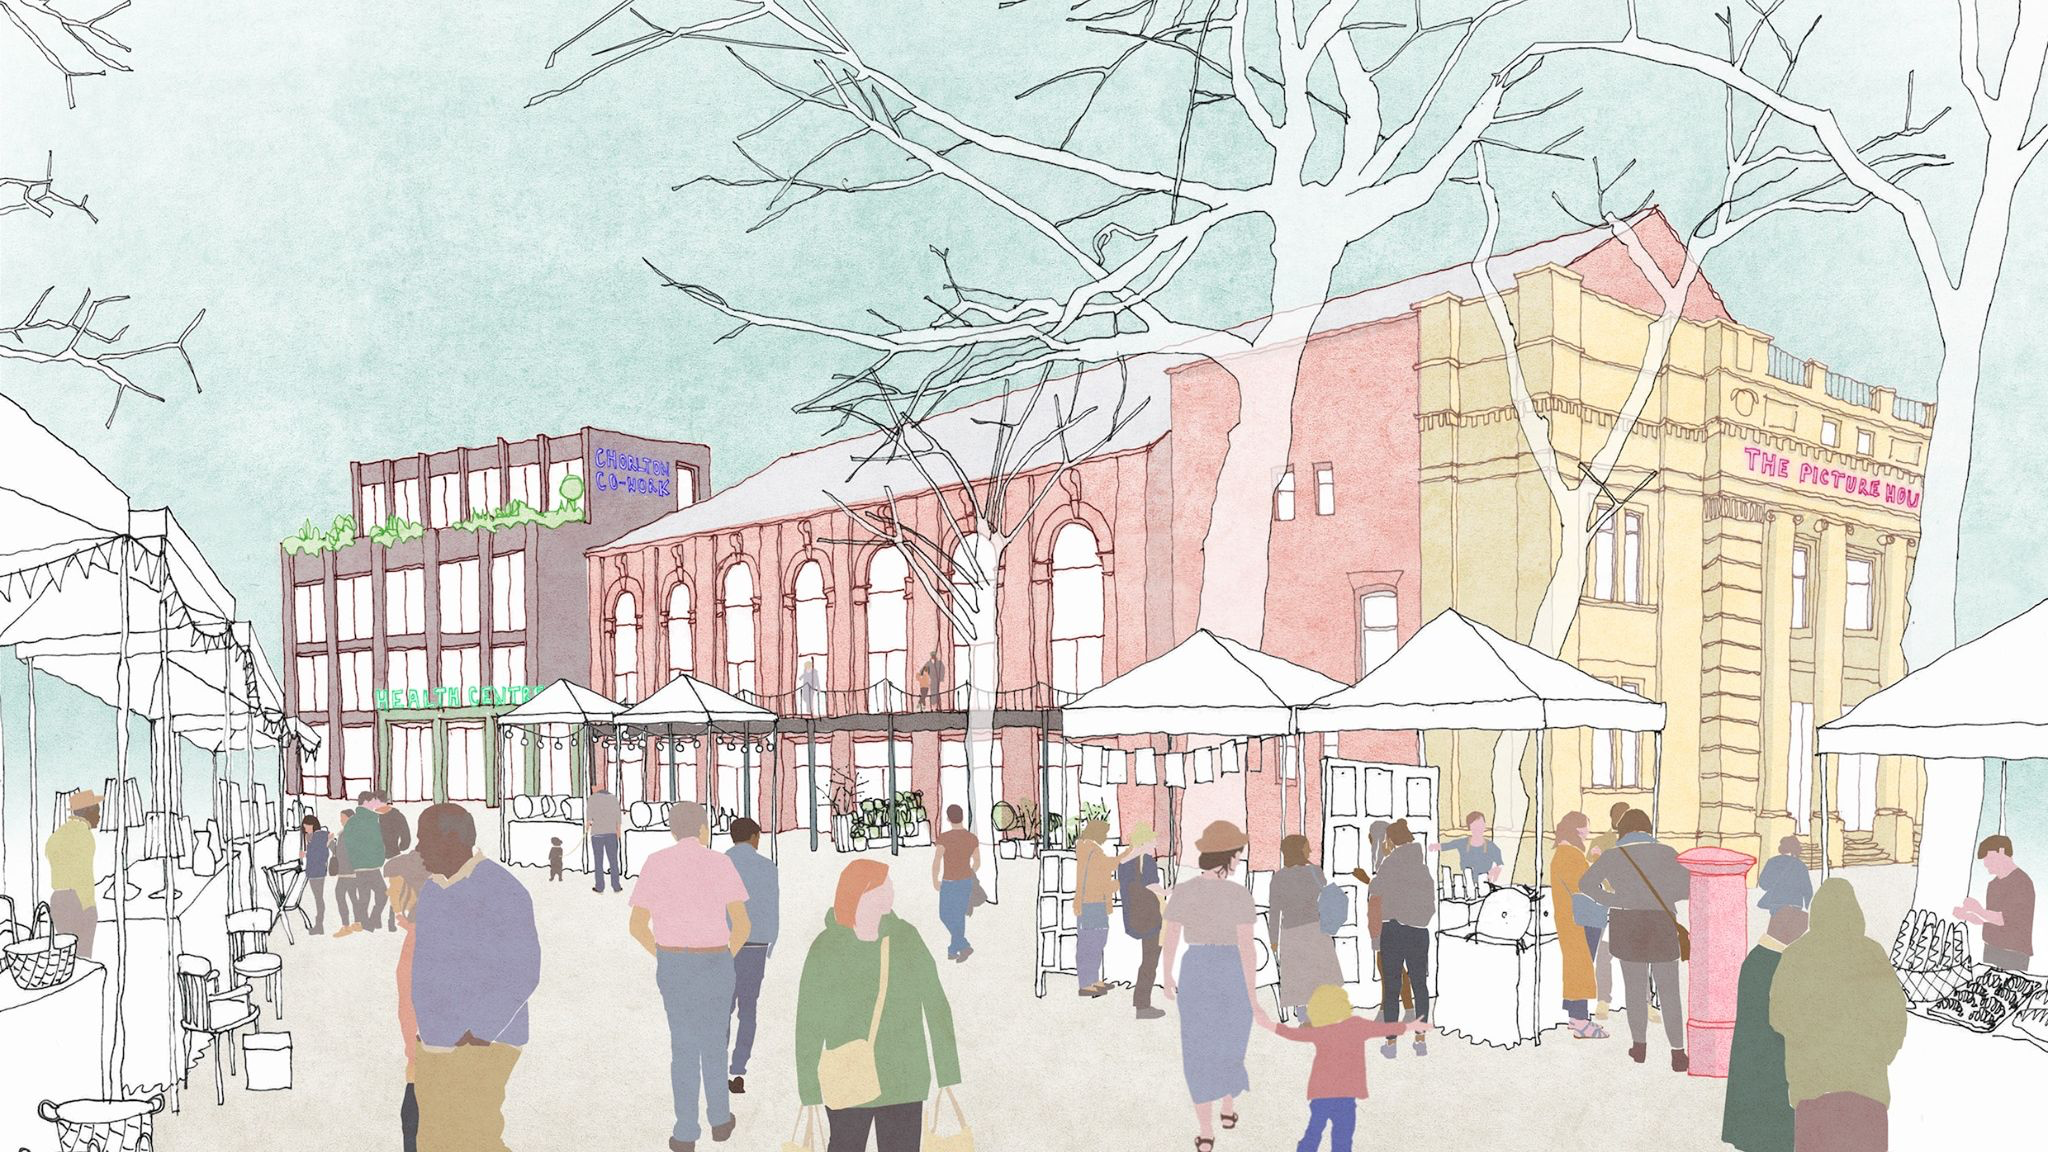 Community Land Trust vision for the Picture House